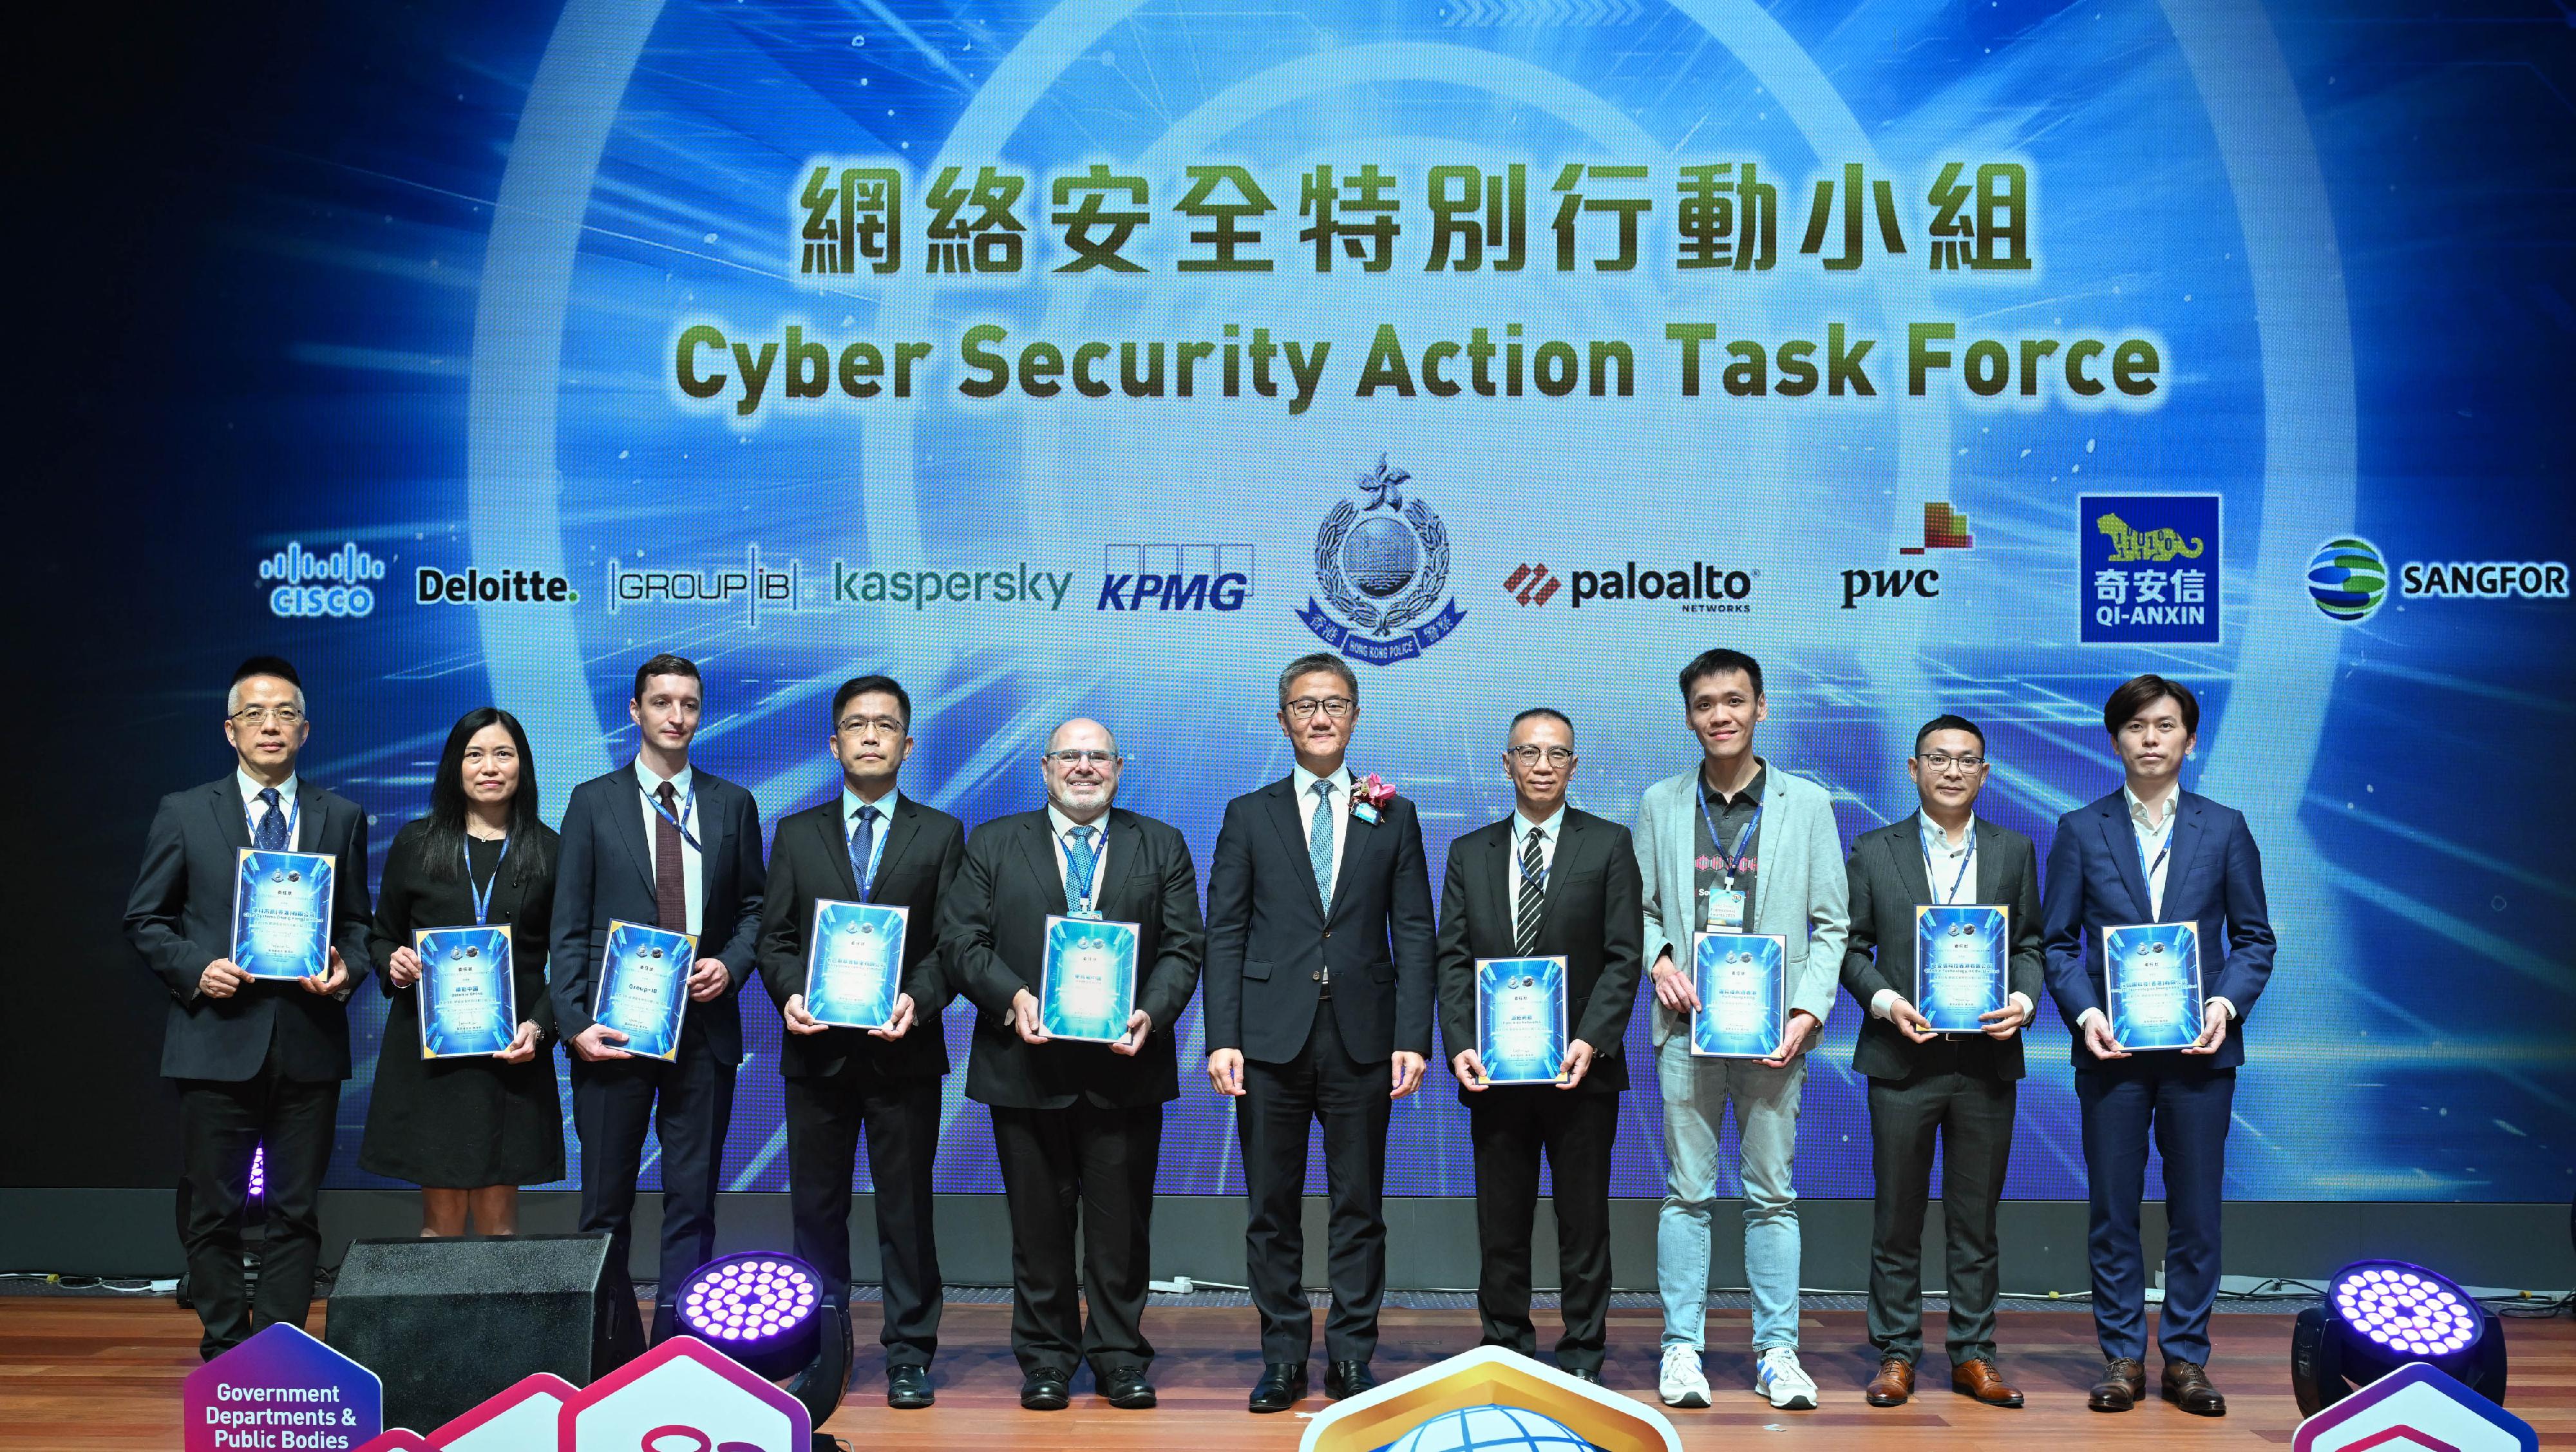 The Cyber Security Professional Awards 2023 presentation ceremony was held by the Hong Kong Police Force today (February 29). Photo shows the Commissioner of Police, Mr Siu Chak-yee (sixth left); at the Cyber Security Action Task Force (CSATK) launching ceremony with members of the CSATK.